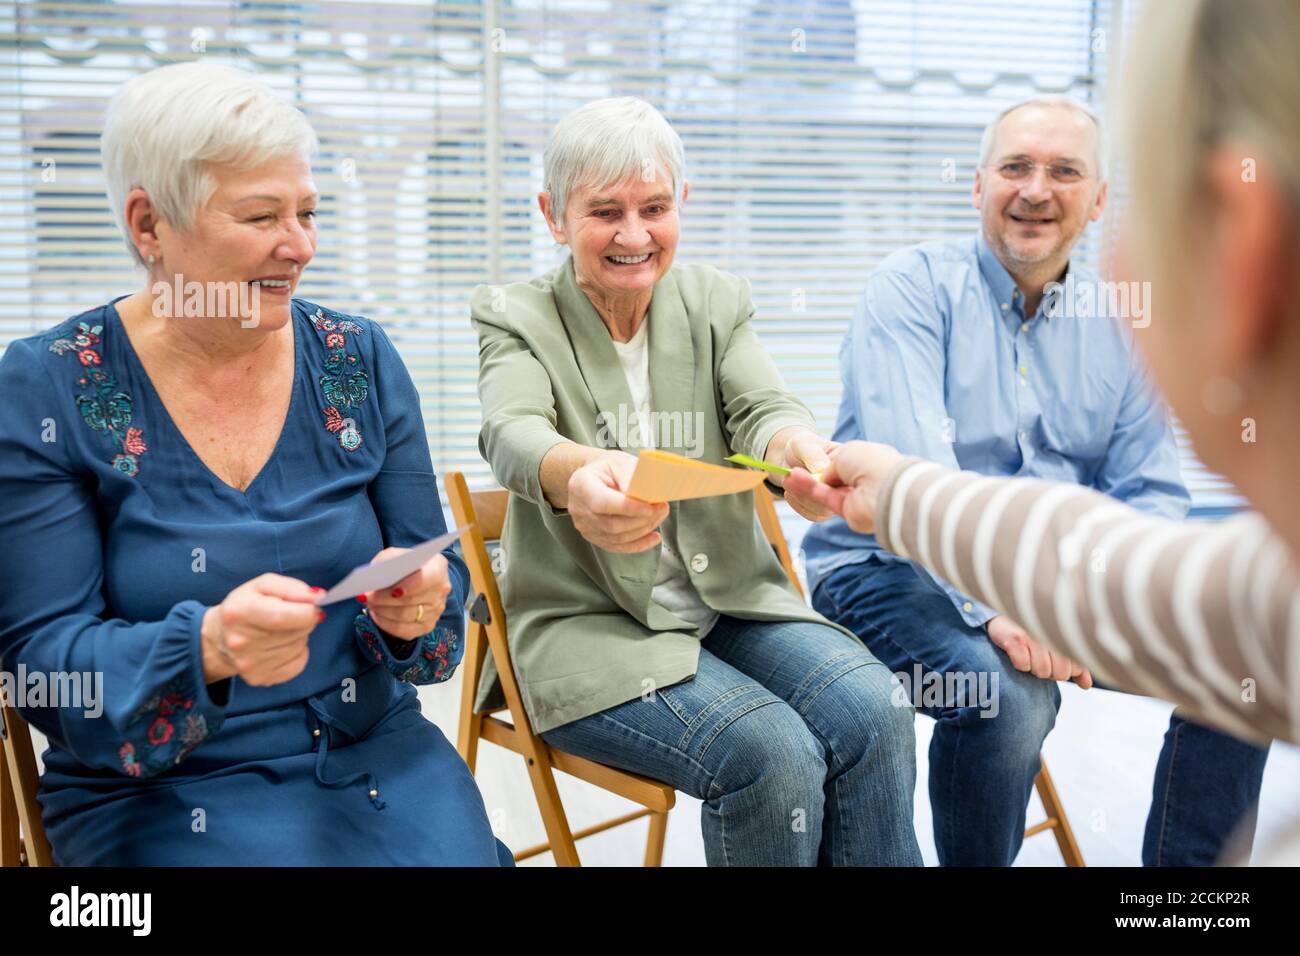 Seniors in retirement home attending group therapy using colorful paper cards Stock Photo